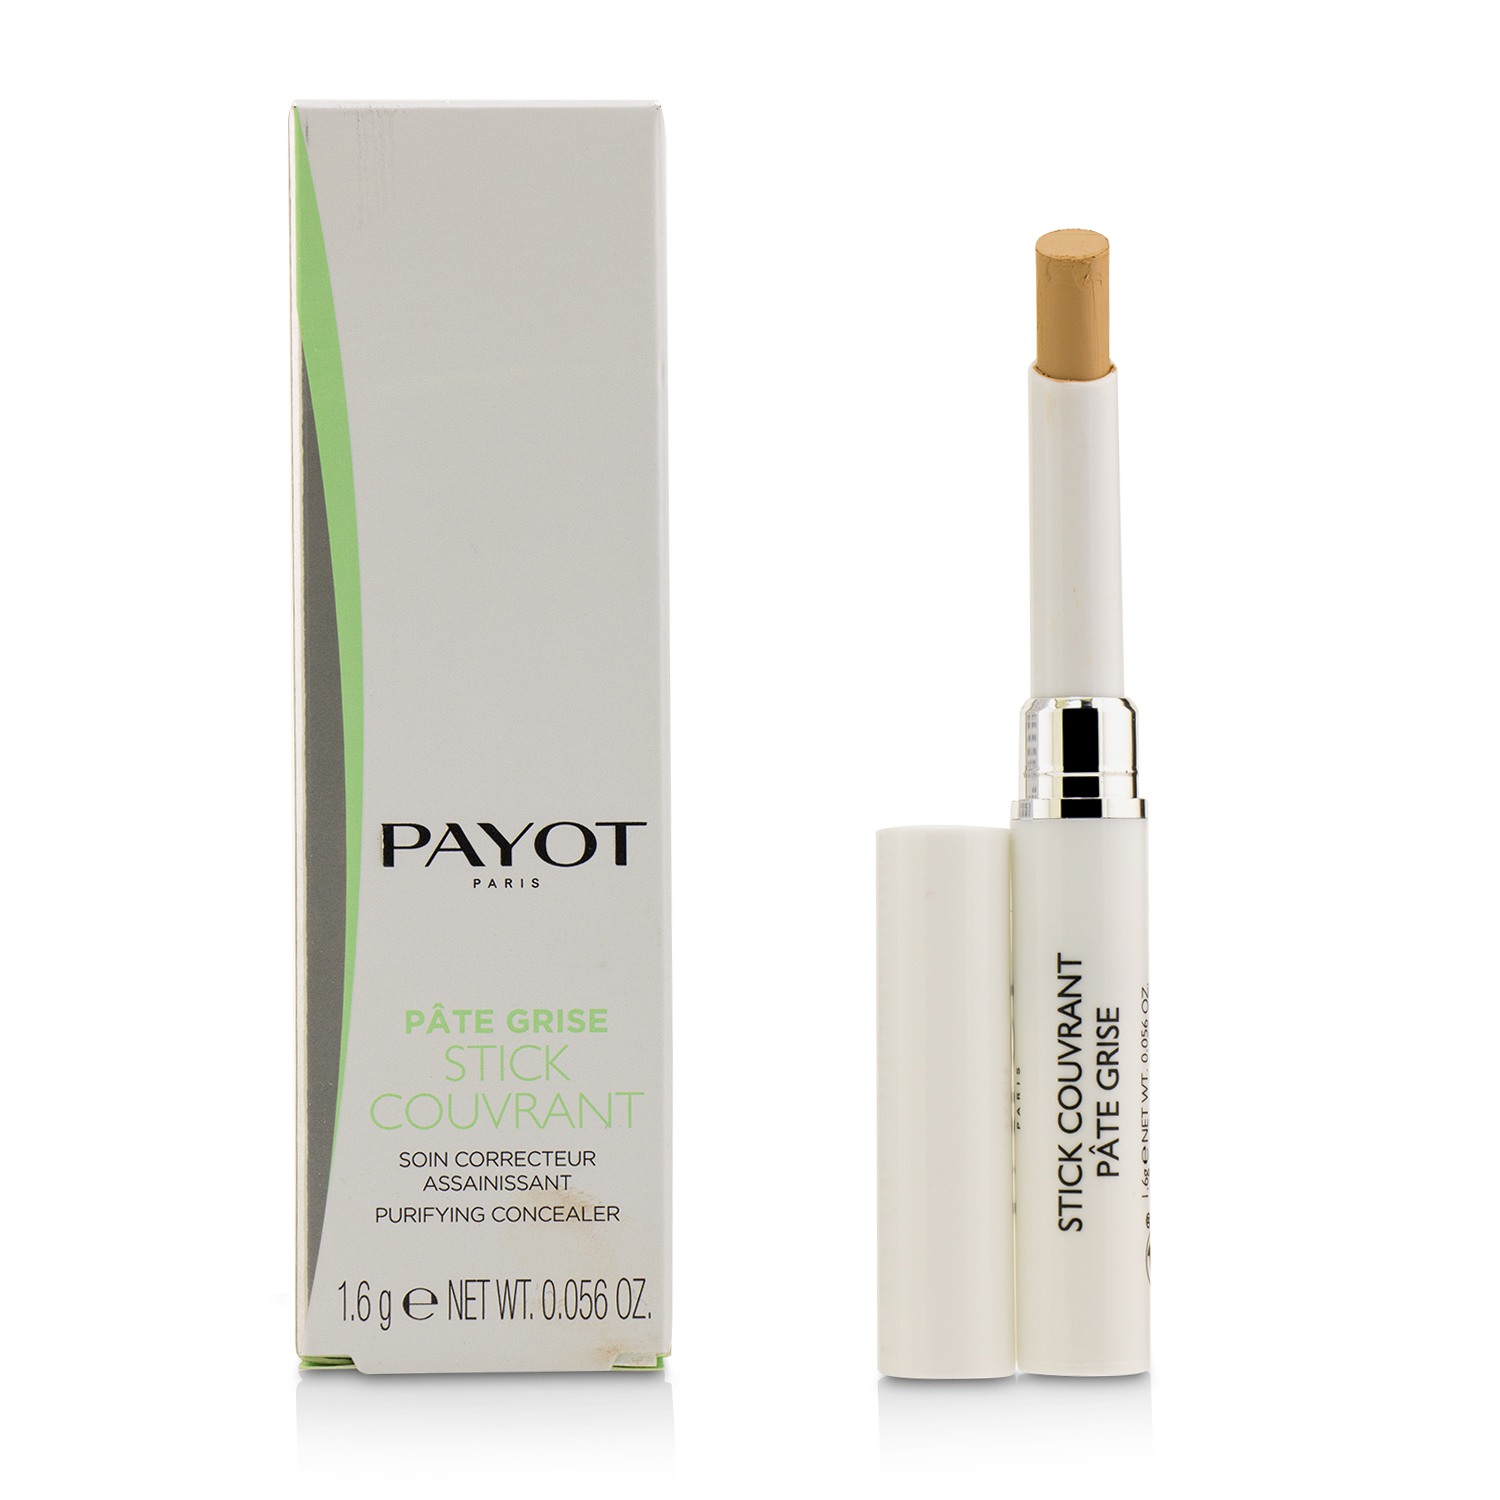 Pate Grise Stick Couvrant Purifying Concealer Payot Image